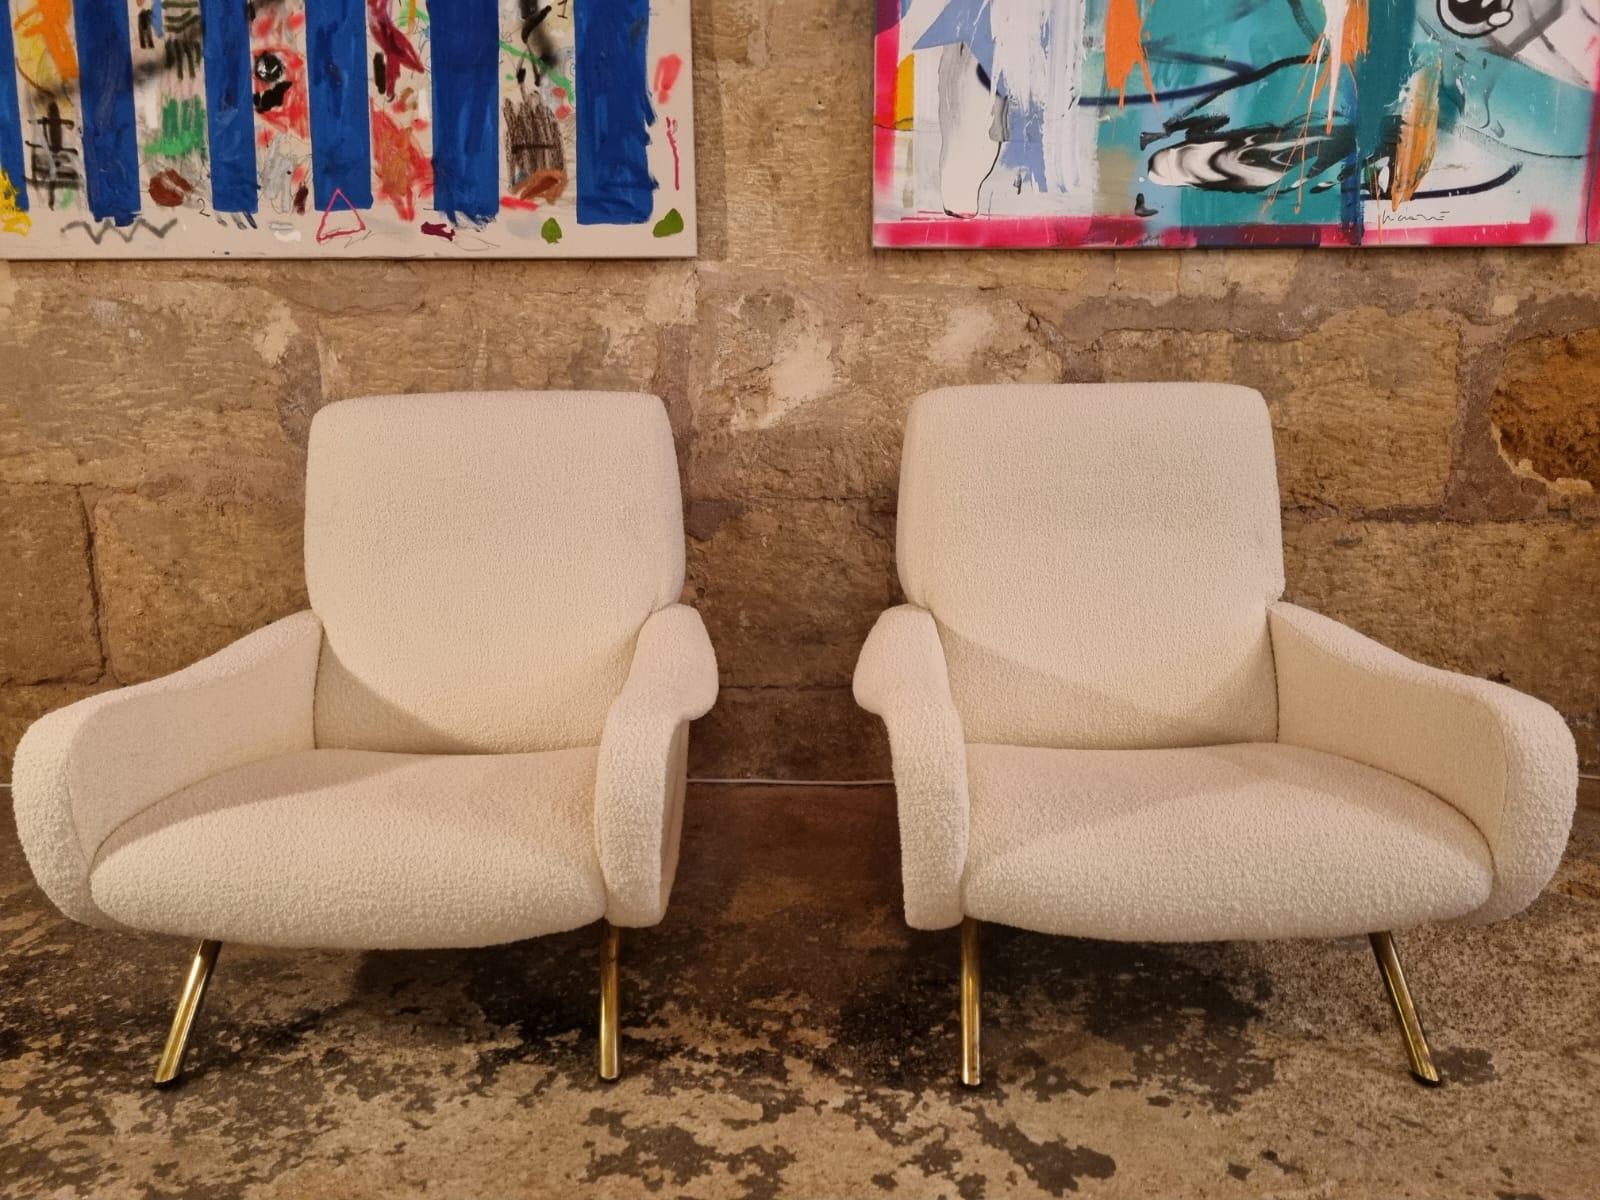 1 of 2, Lady Chair by designer Marco Zanusso from the 1950s for Arflex.
Completely restored to the highest quality with a beautiful cream-colored looped (Bouclé) fabric by French Bisson Bruneel, ALSO Lady sofa available for sale in a separate